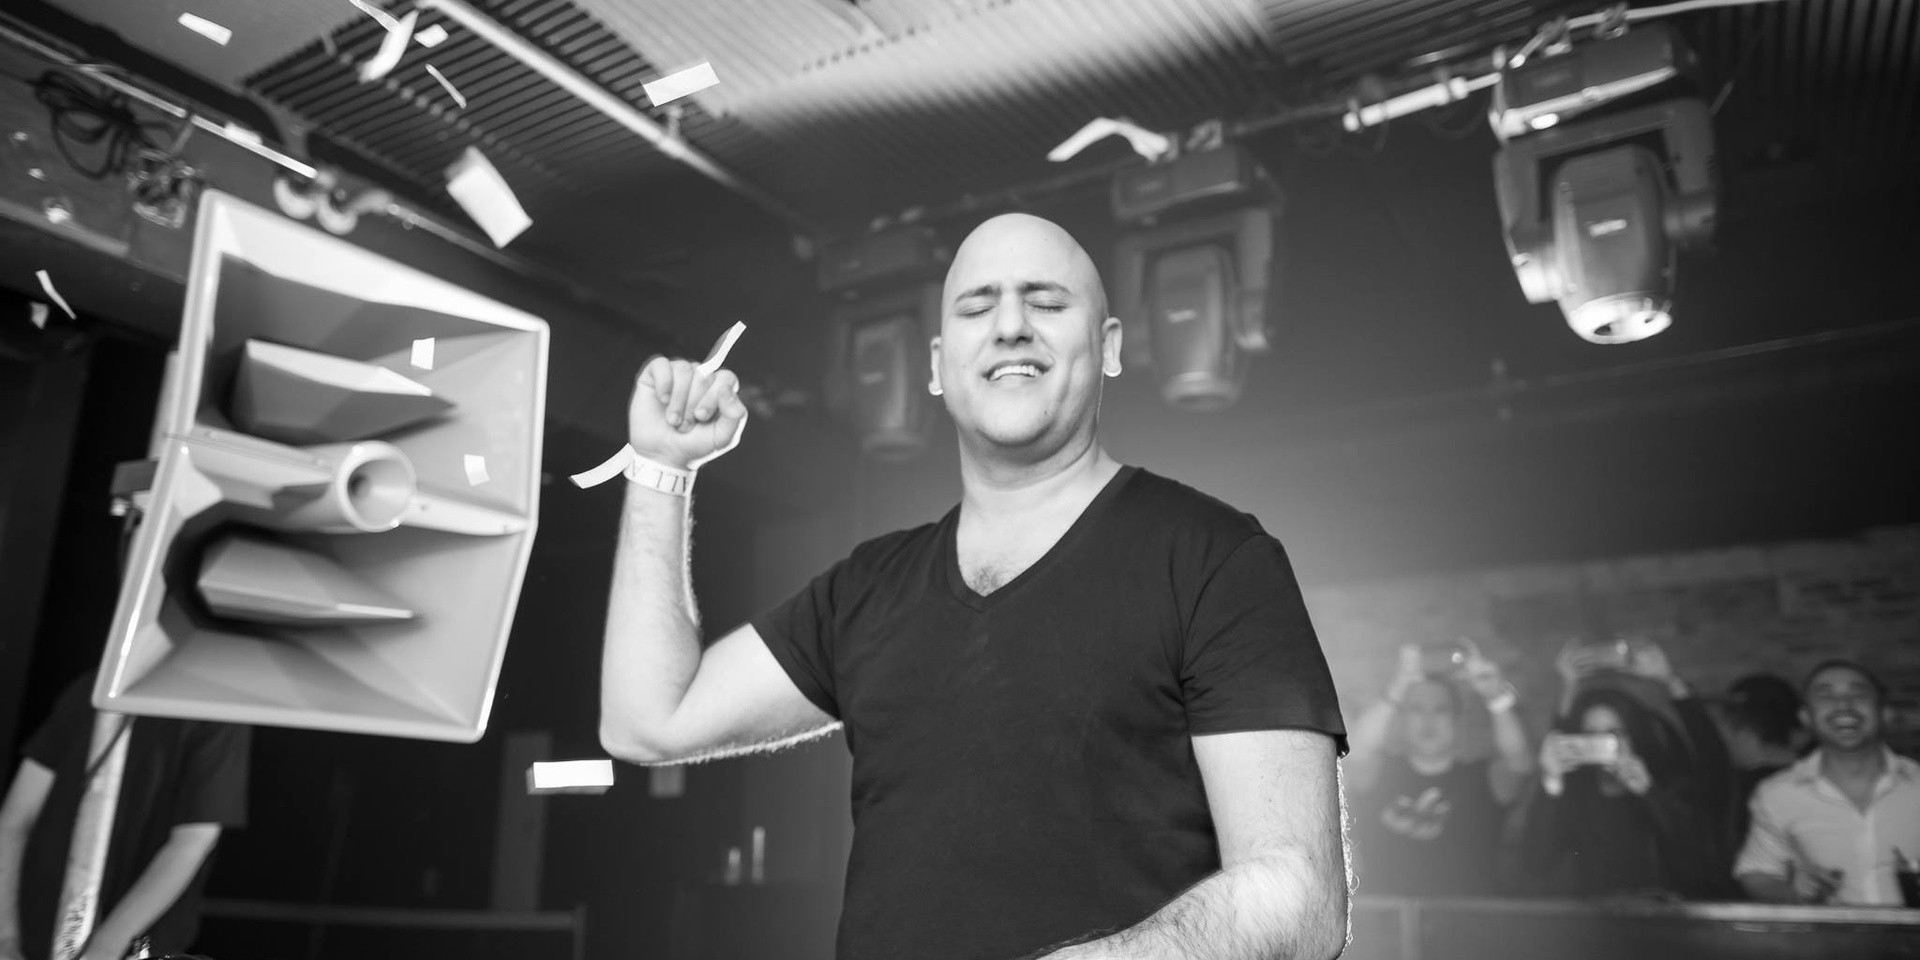 Aly & Fila open up: "I will only play in Zouk if a new owner buys the place"